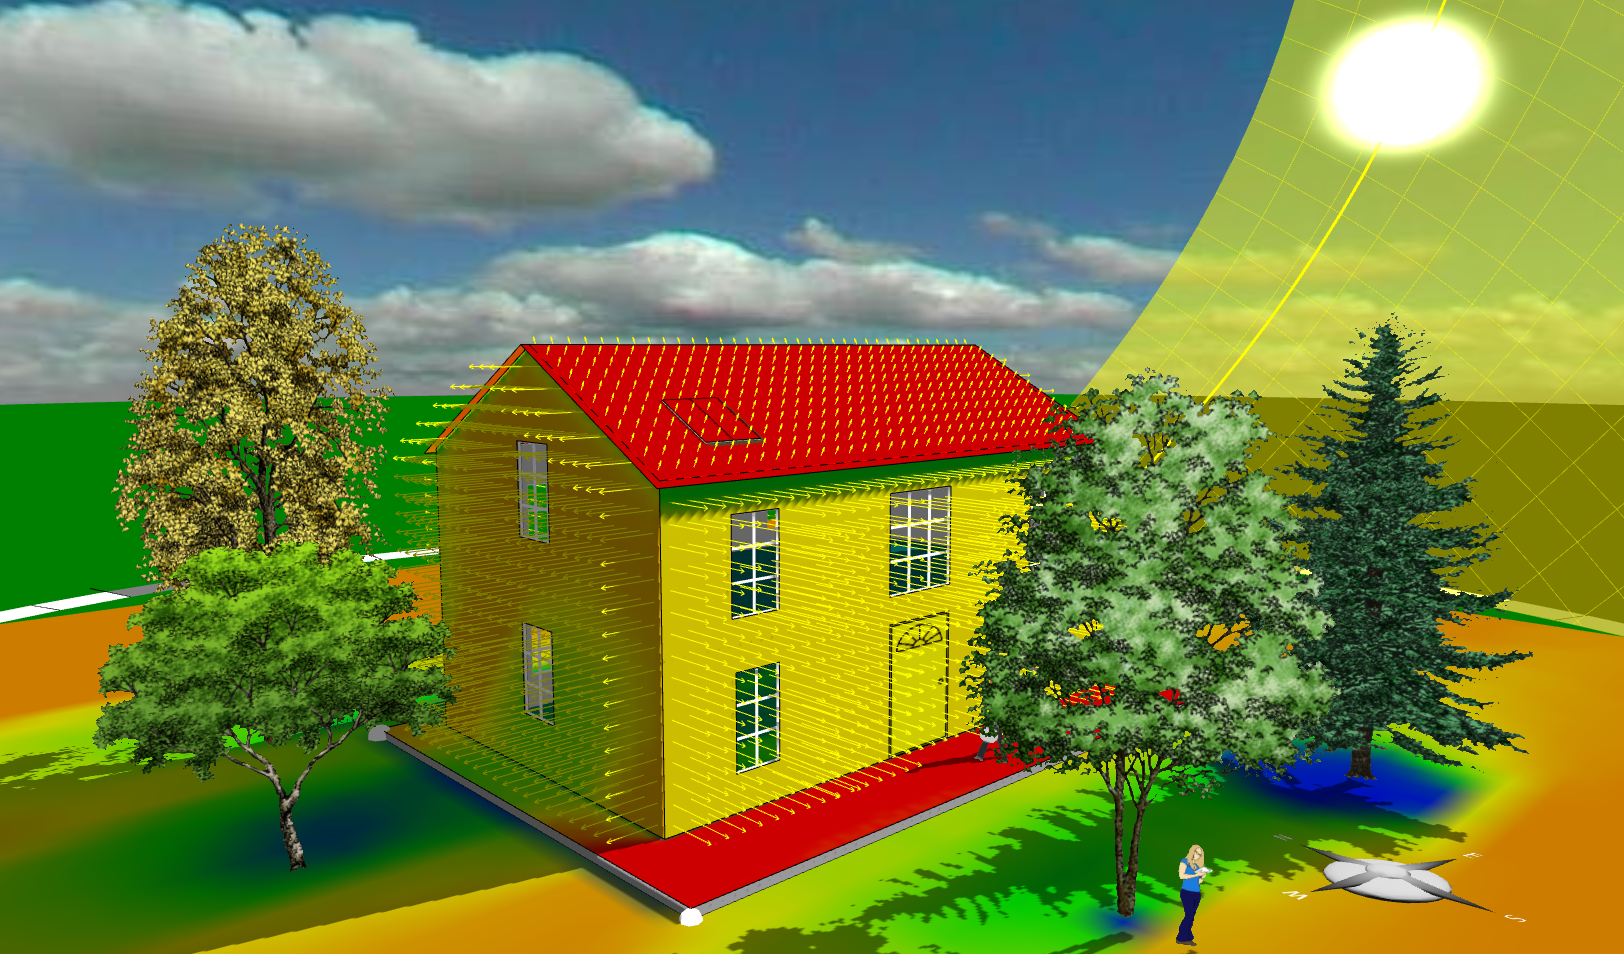 Monday’s Lesson: Designing an Energy-Plus Home